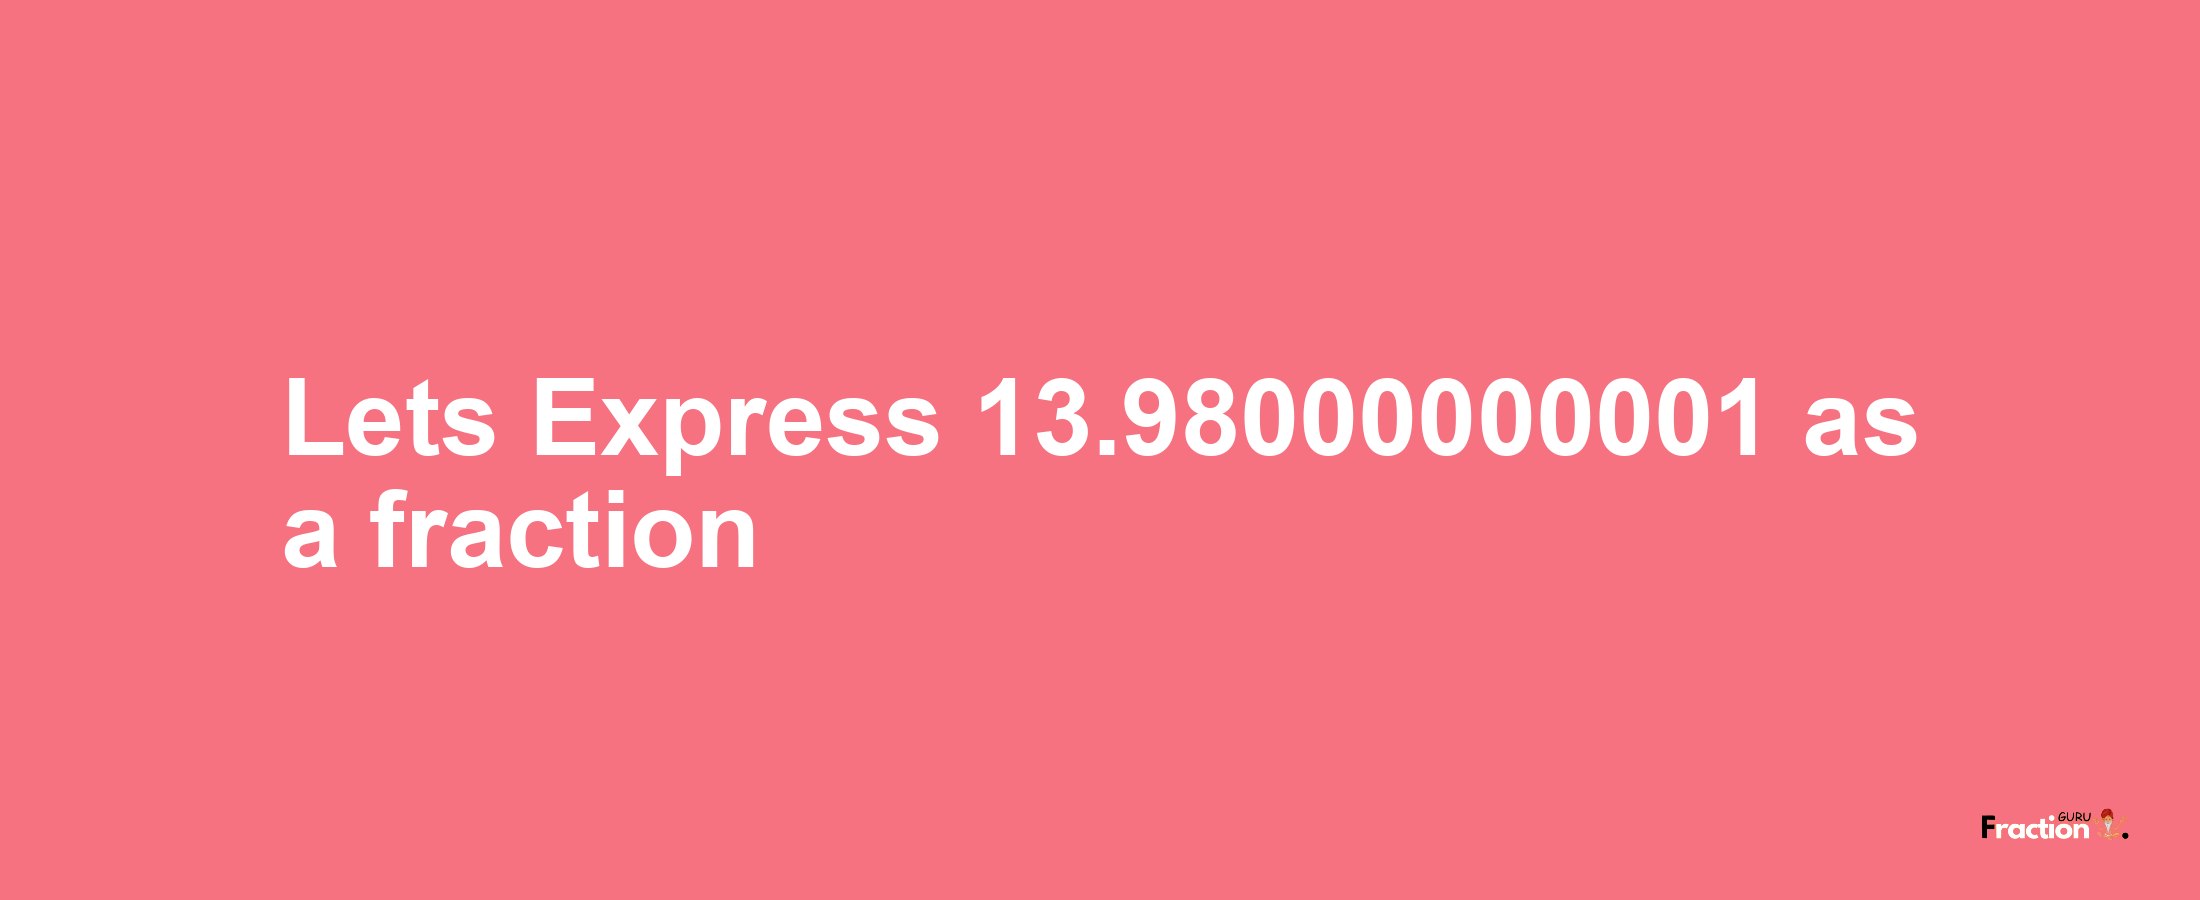 Lets Express 13.98000000001 as afraction